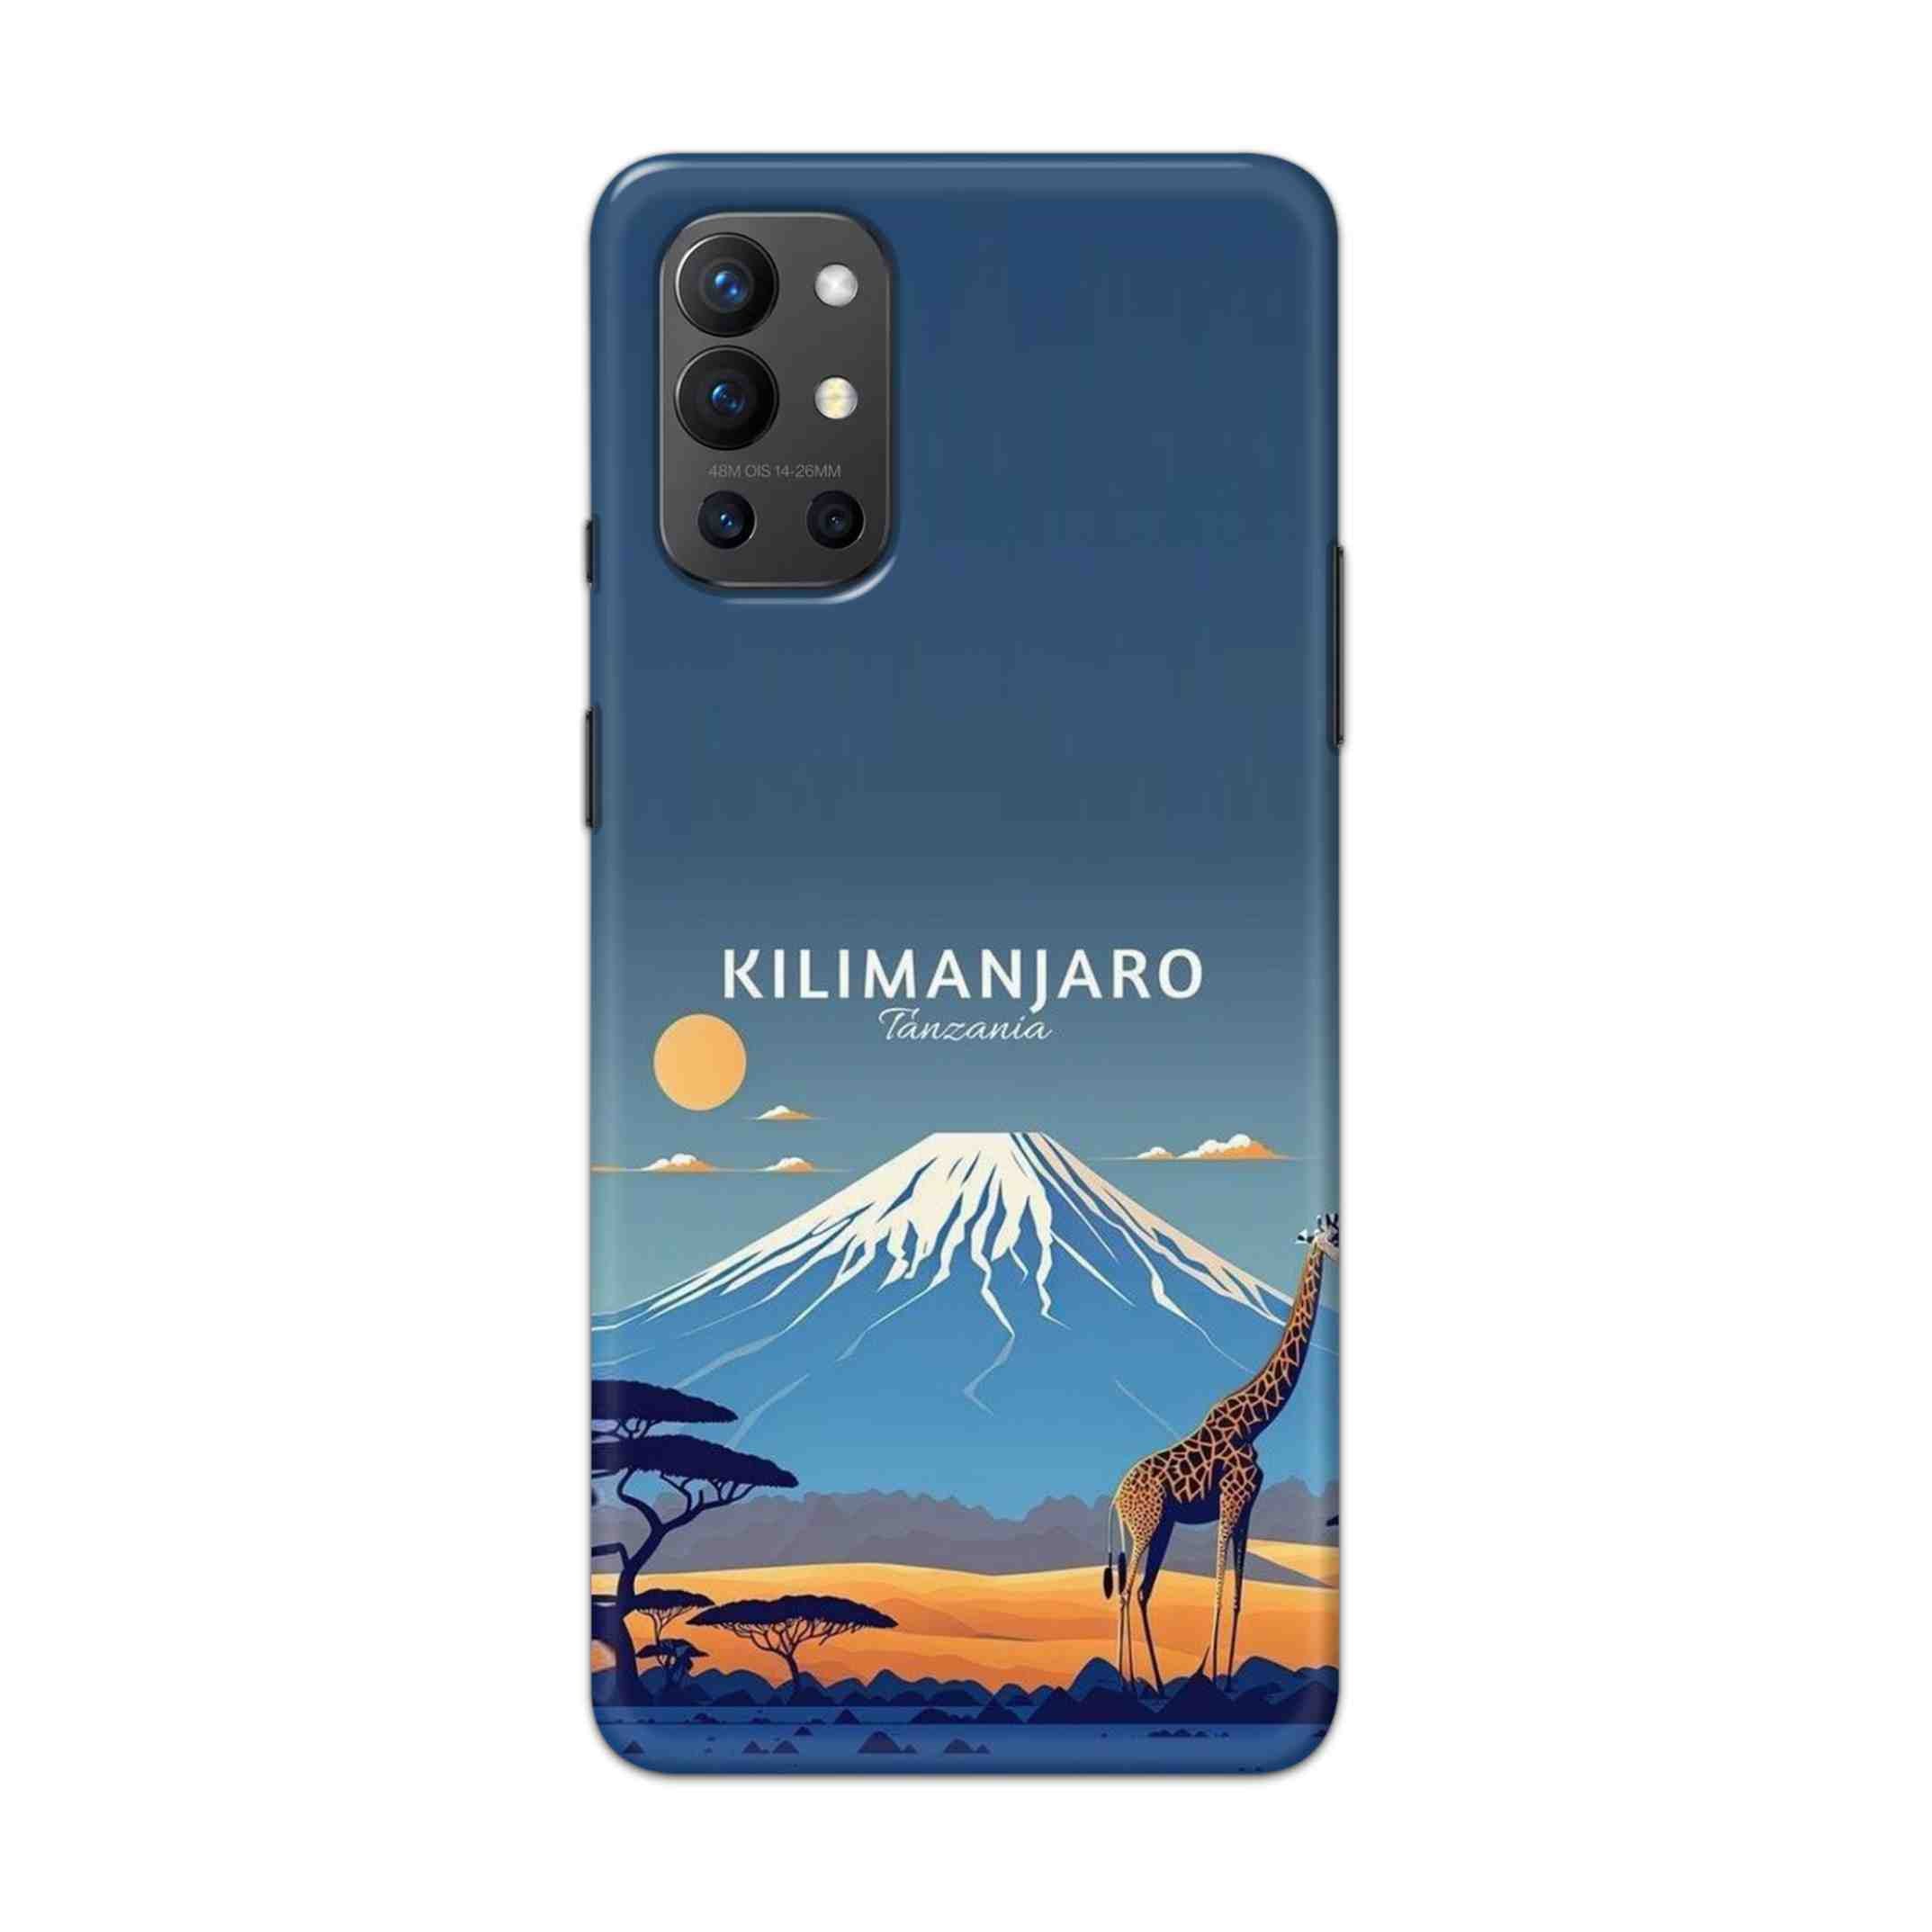 Buy Kilimanjaro Hard Back Mobile Phone Case Cover For OnePlus 9R / 8T Online